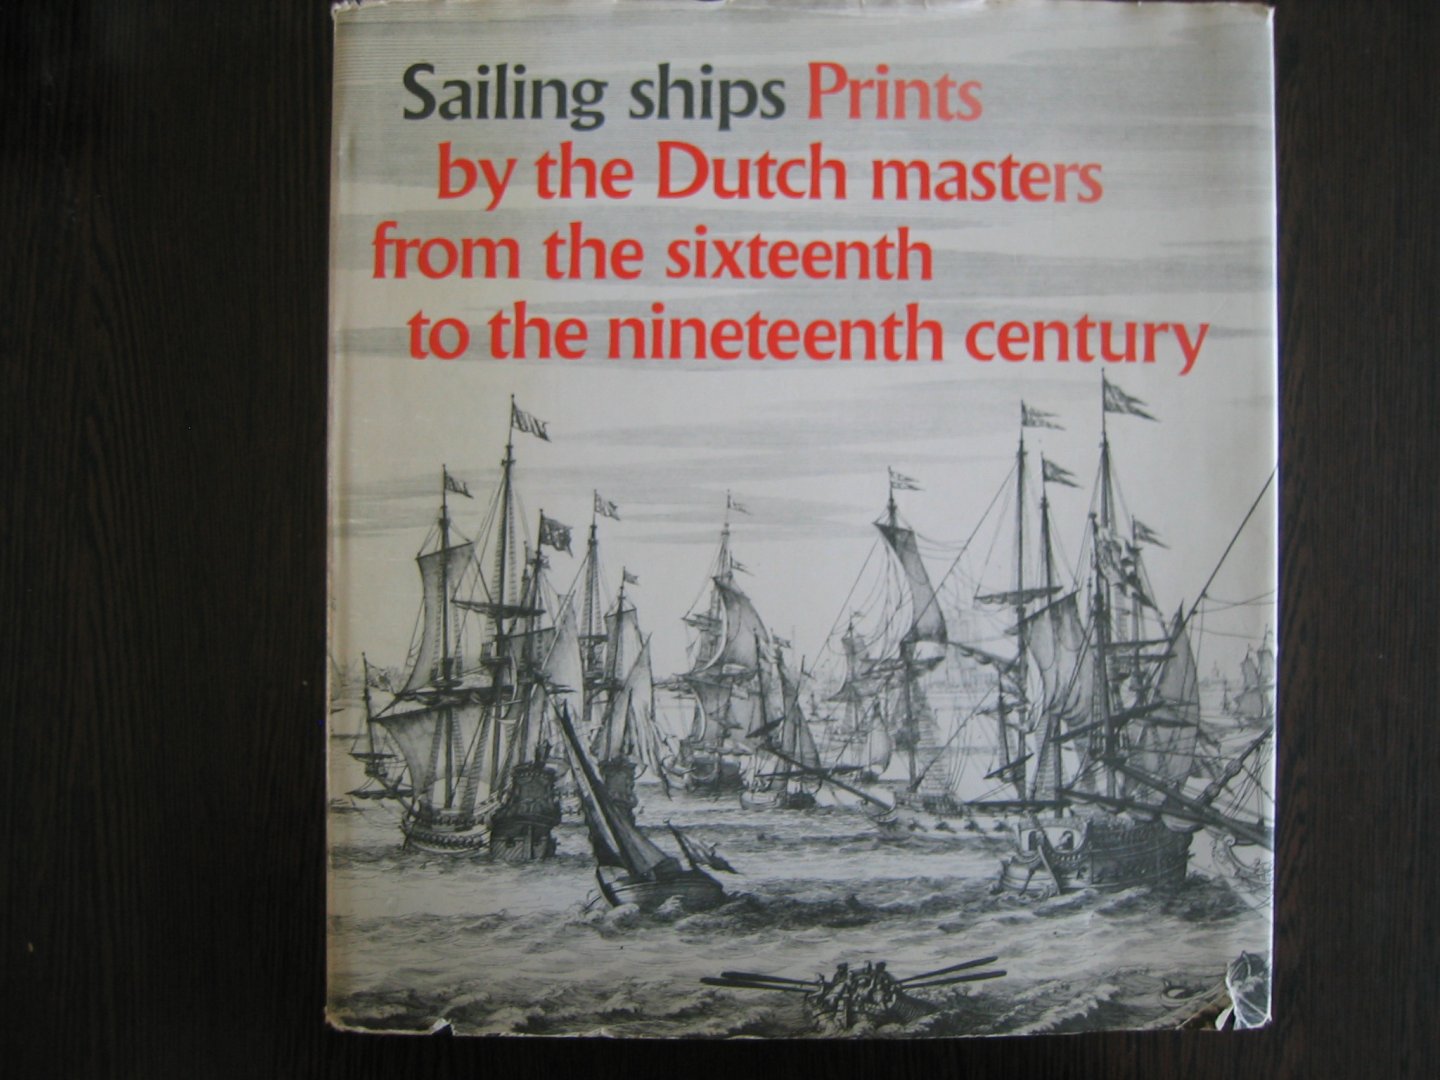 Groot, Irene de - Sailing ships Prints by the Dutch masters from te sixteenth to the nineteenth century